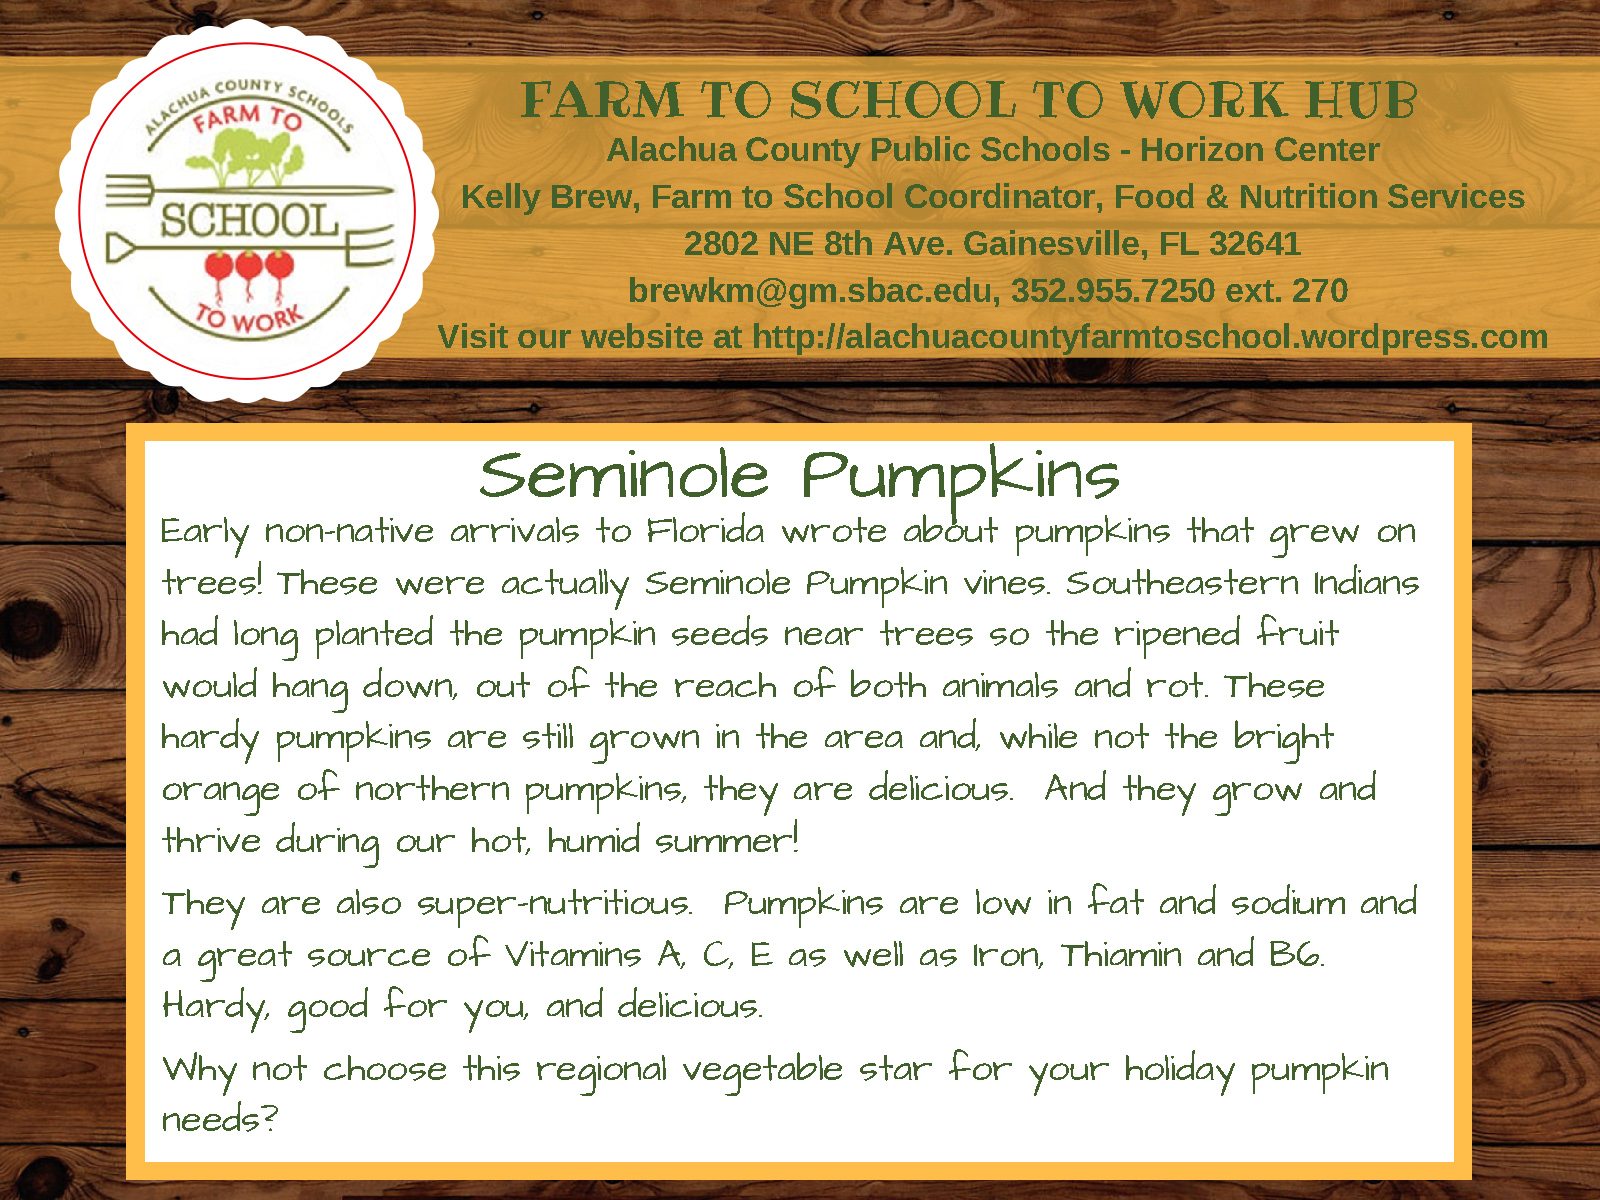 Seminole Pumpkins: Early non-native arrivals to Florida wrote about pumpkins. that grew on trees! These were actually Seminole Pumpkin vines. Southeastern Indians had long planted the pumpkin seeds near trees so the ripened fruit would hang down, out of reach of both animals and rot. These hardy pumpkins are still grown in the area and, while not the bright orange fo northern pumpkins, they are delicious. And they grow and thrive during our hot, humid summer! They are also super-nutritious. Pumpkins are low in fat and sodium and a great source of Vitamins A,C, E as well as iron, thiamin, and B6. Hardy, good for you, and delicious. Why not choose this regional vegetable star for your holiday pumpkin needs?